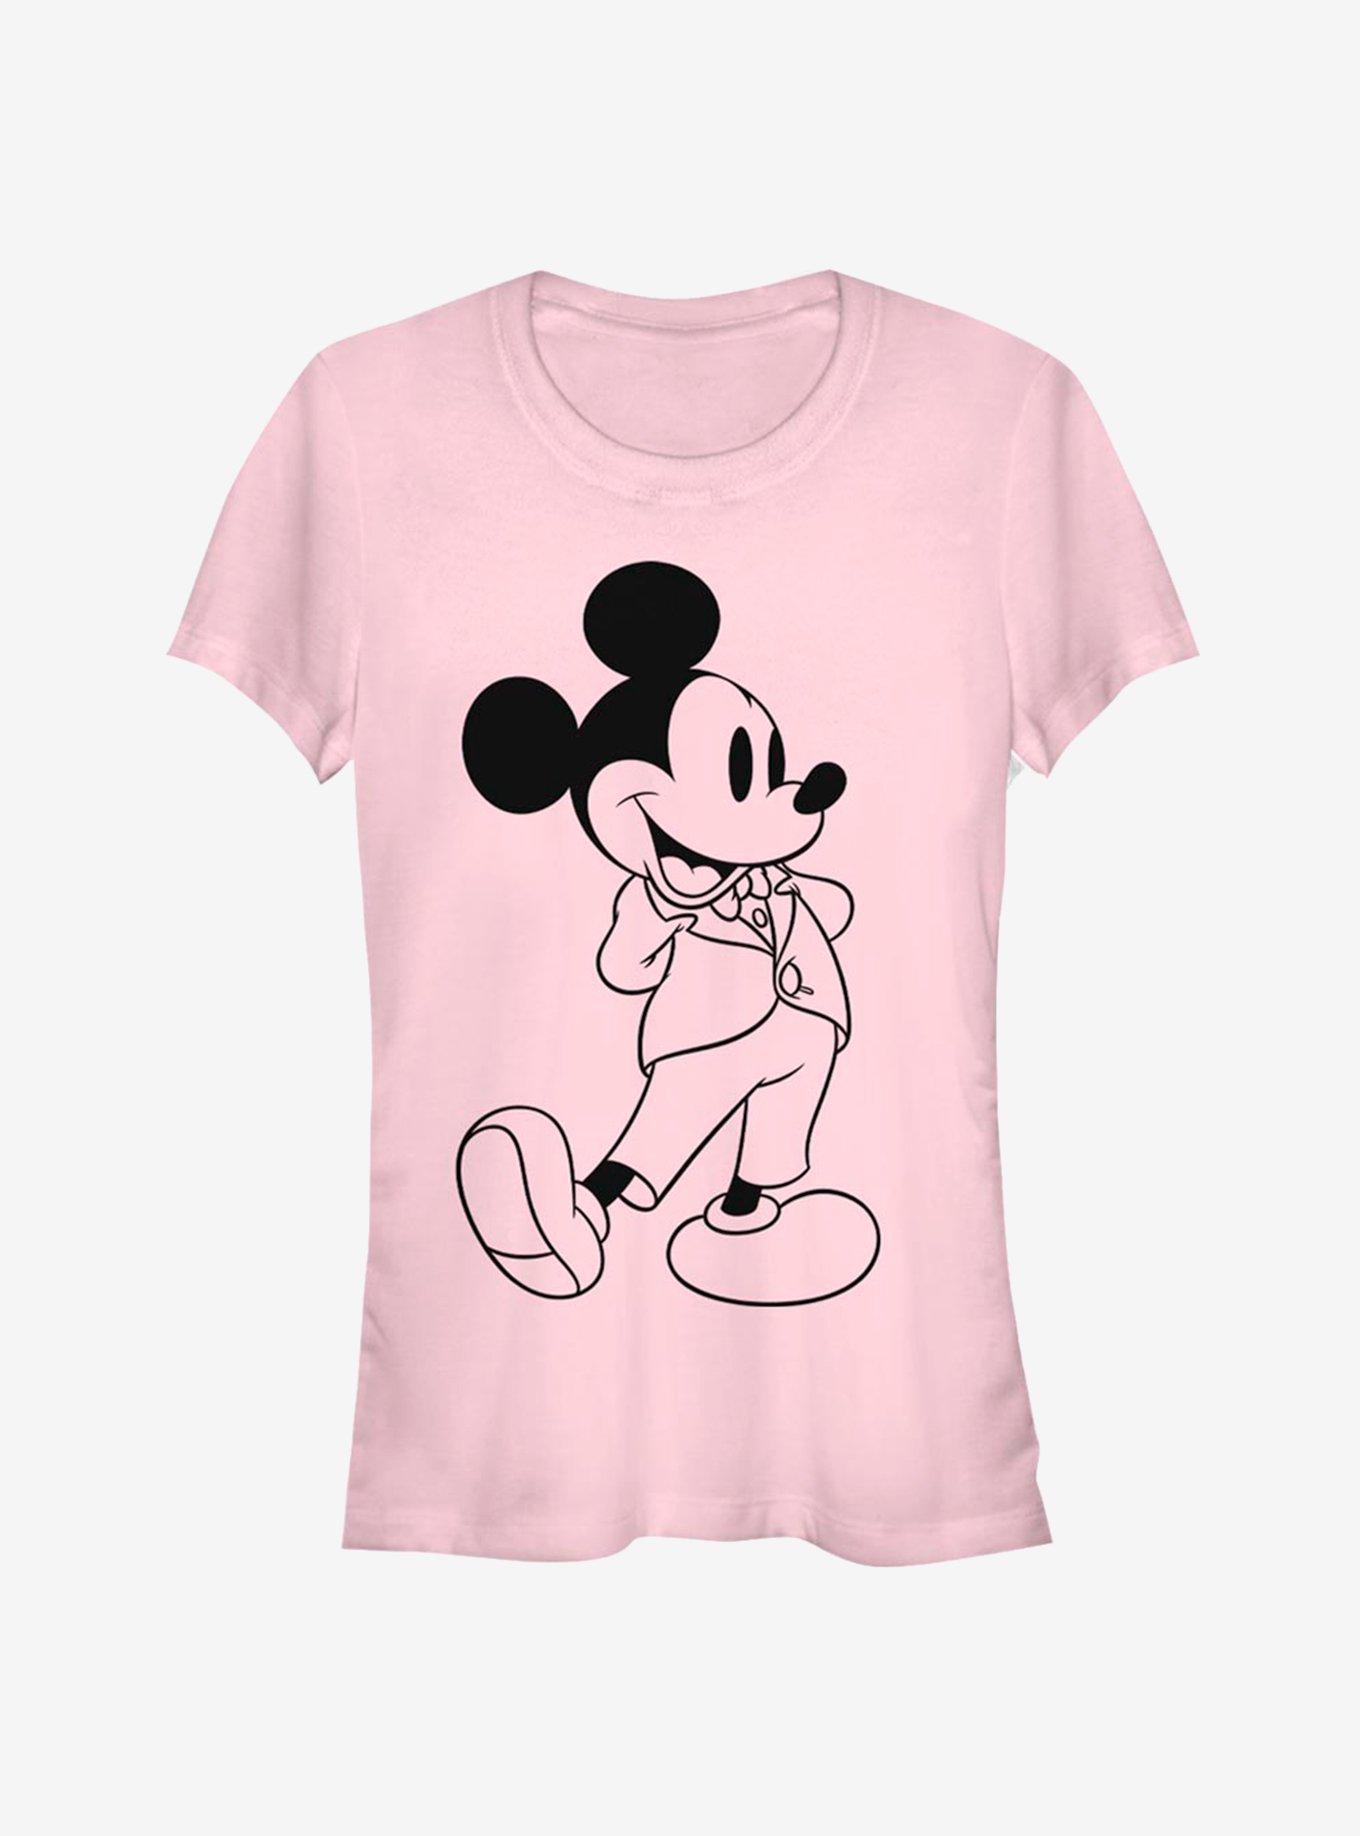 Disney Mickey Mouse Formal Classic Girls T-Shirt, LIGHT PINK, hi-res